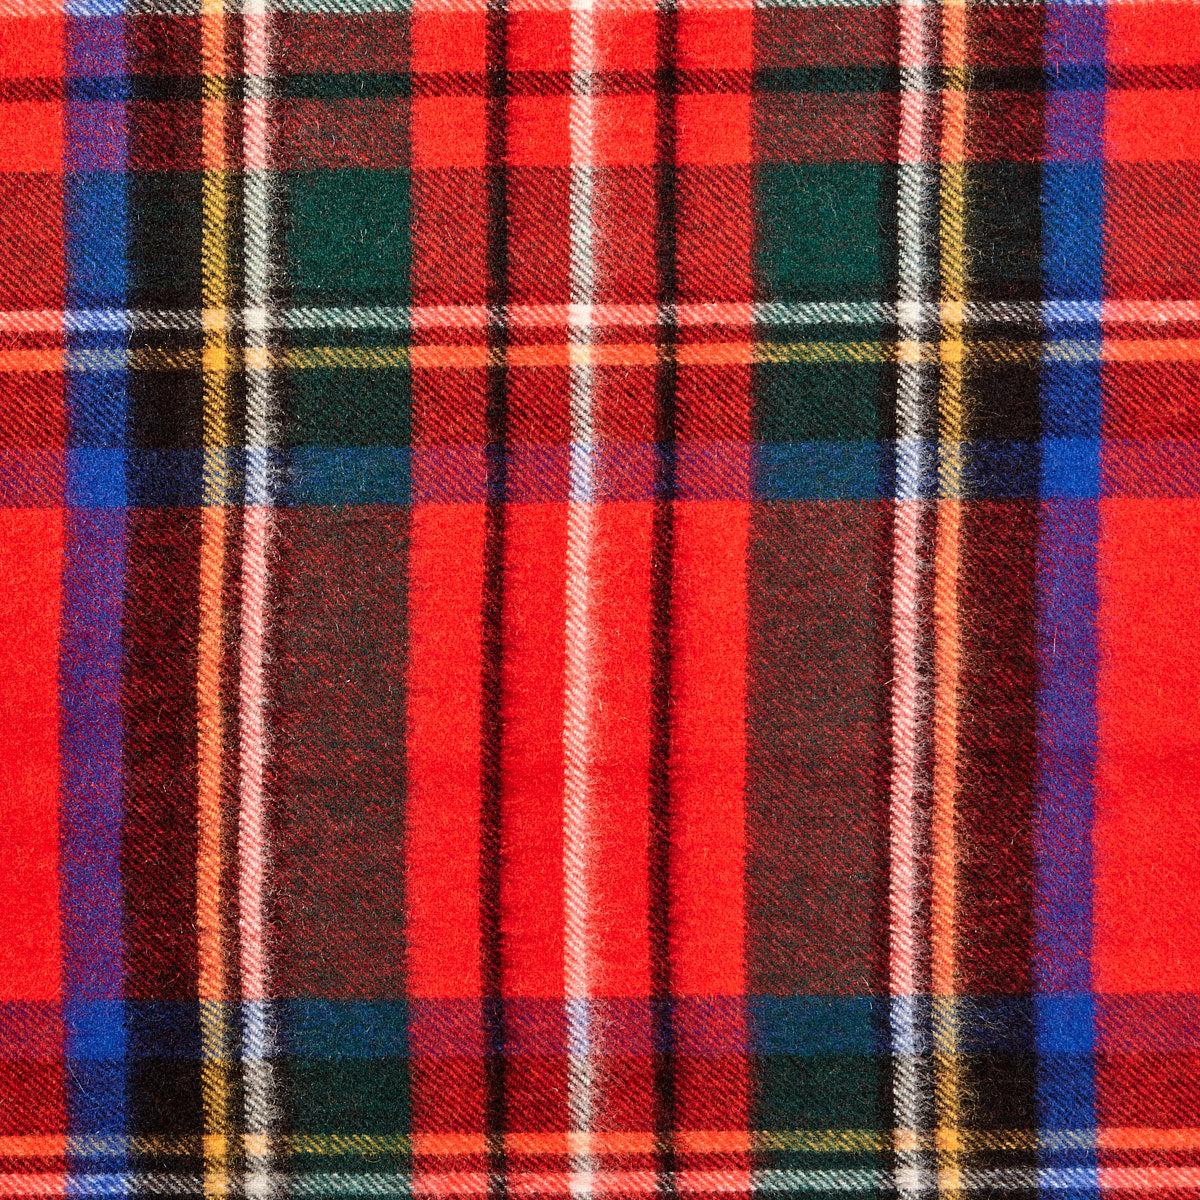 A classic Red Checked Royal Stewart Cashmere Scarf by Johnstons of Elgin.